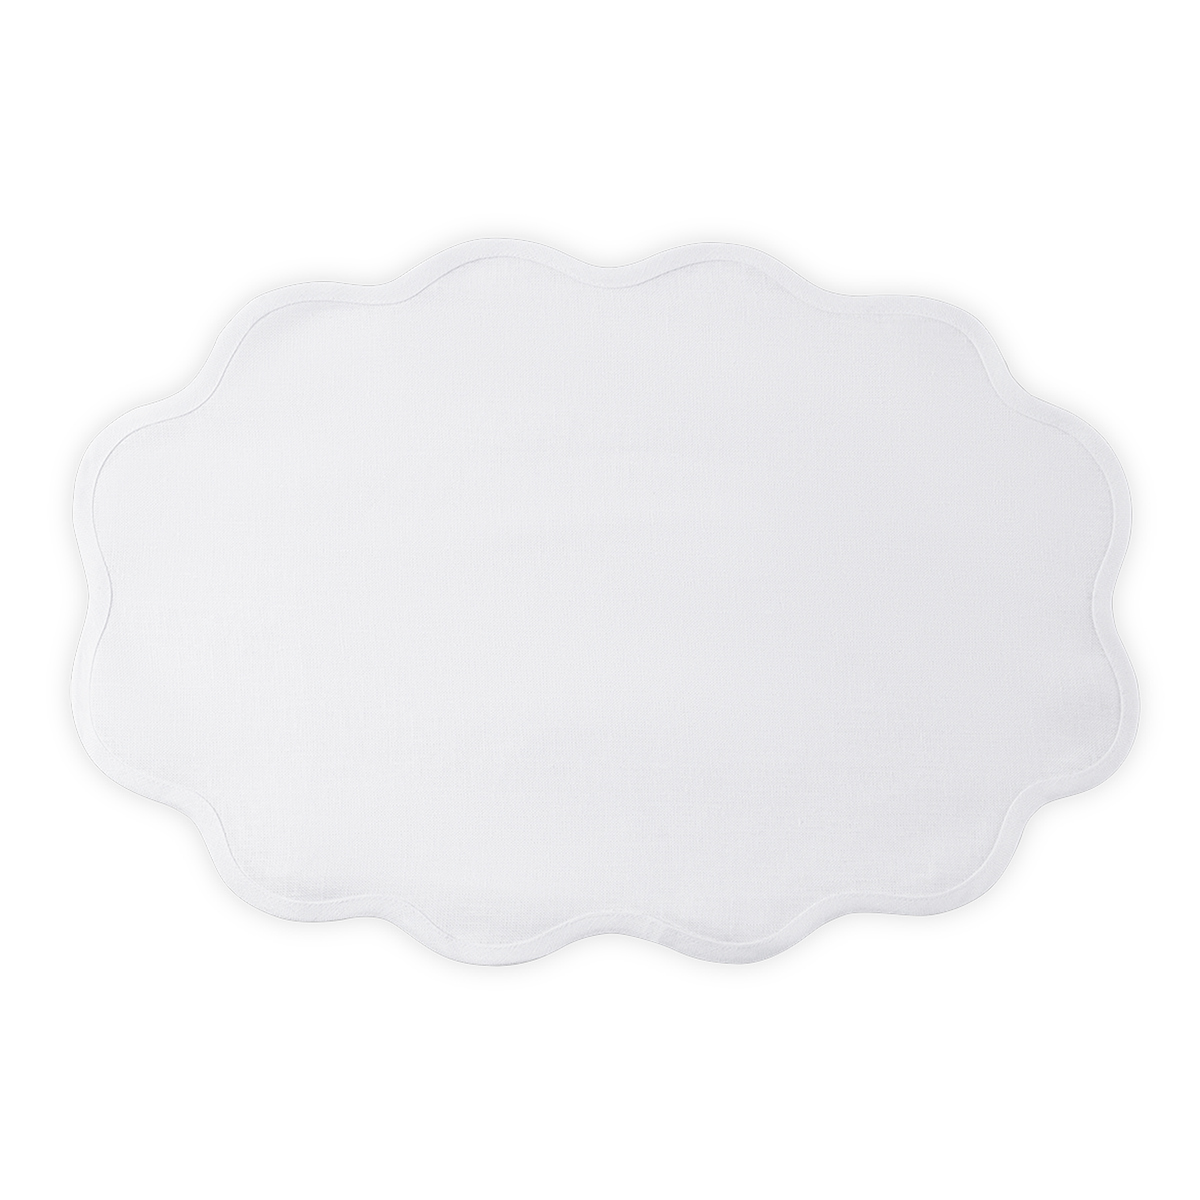 Oval Placemat of Matouk Scallop Edge Table Linens in Color White/White